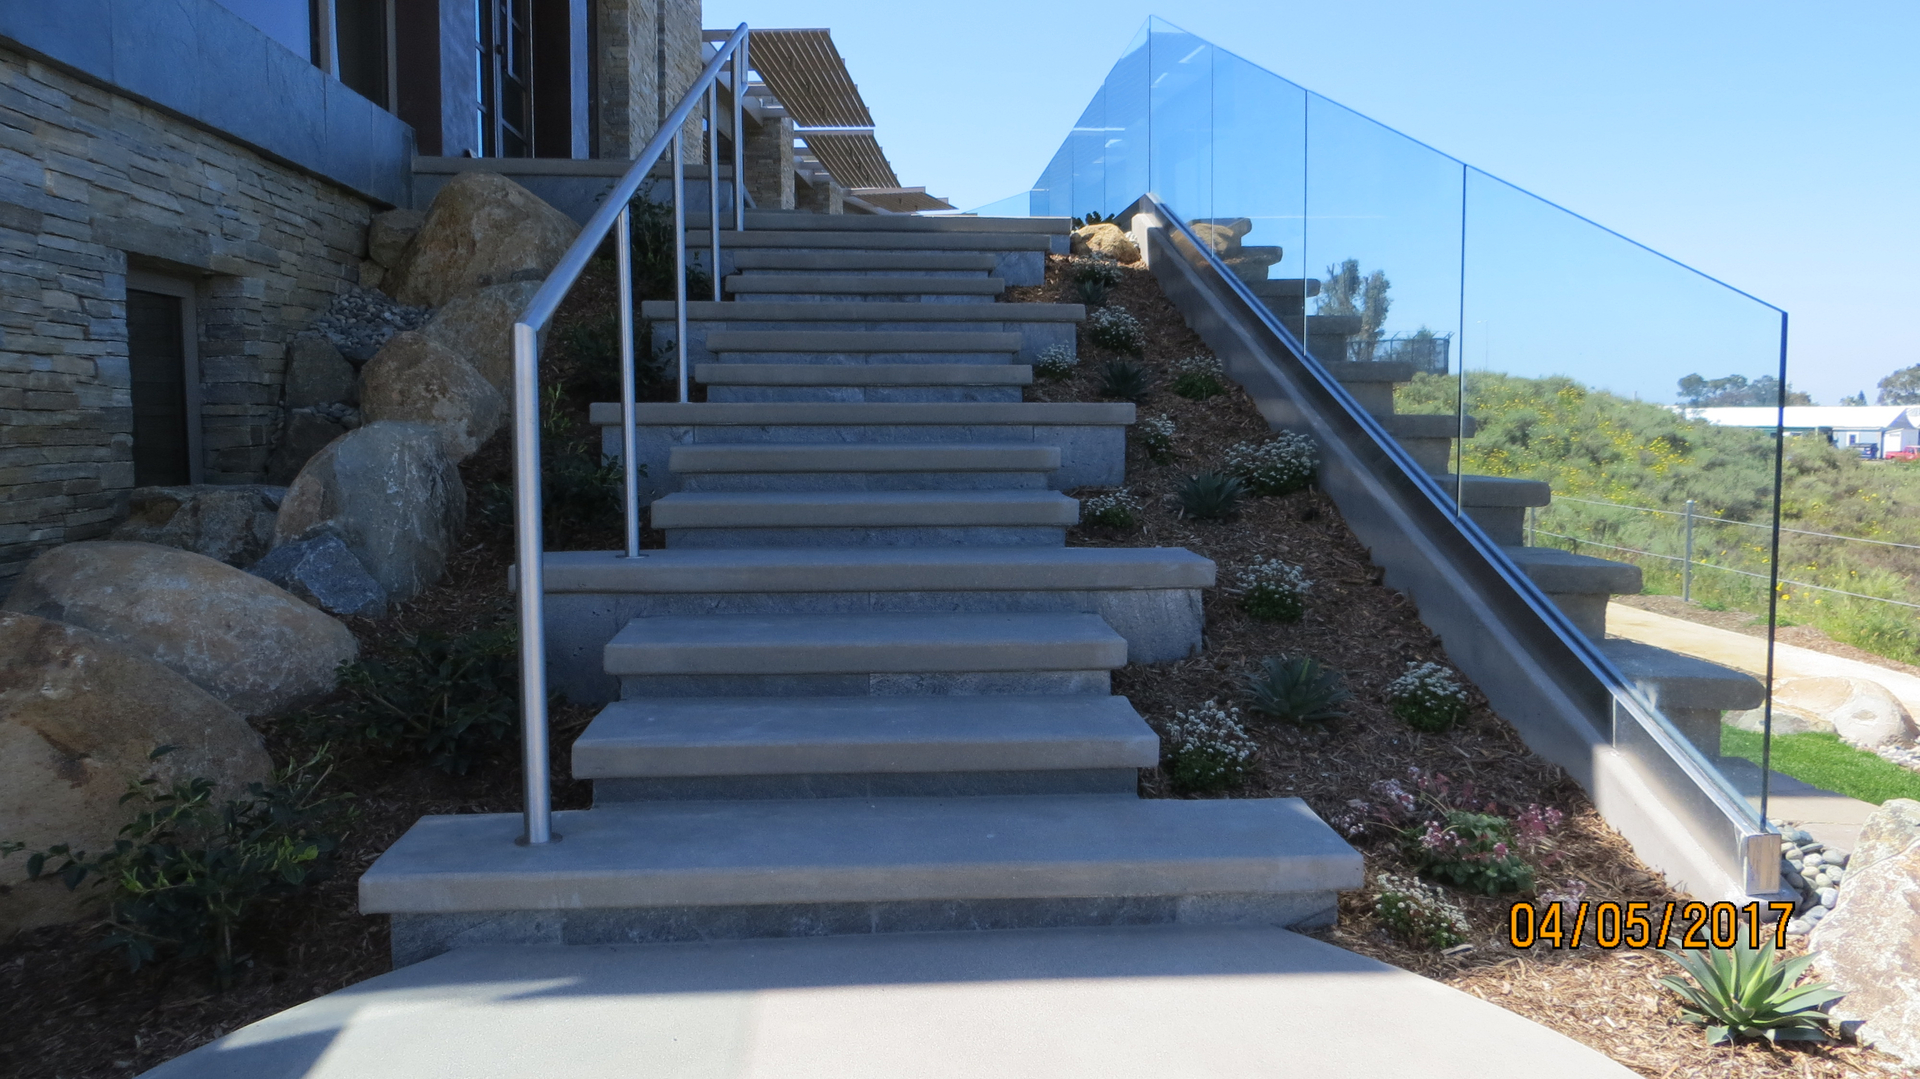 A Concrete Slab Stairs With Glass Railing